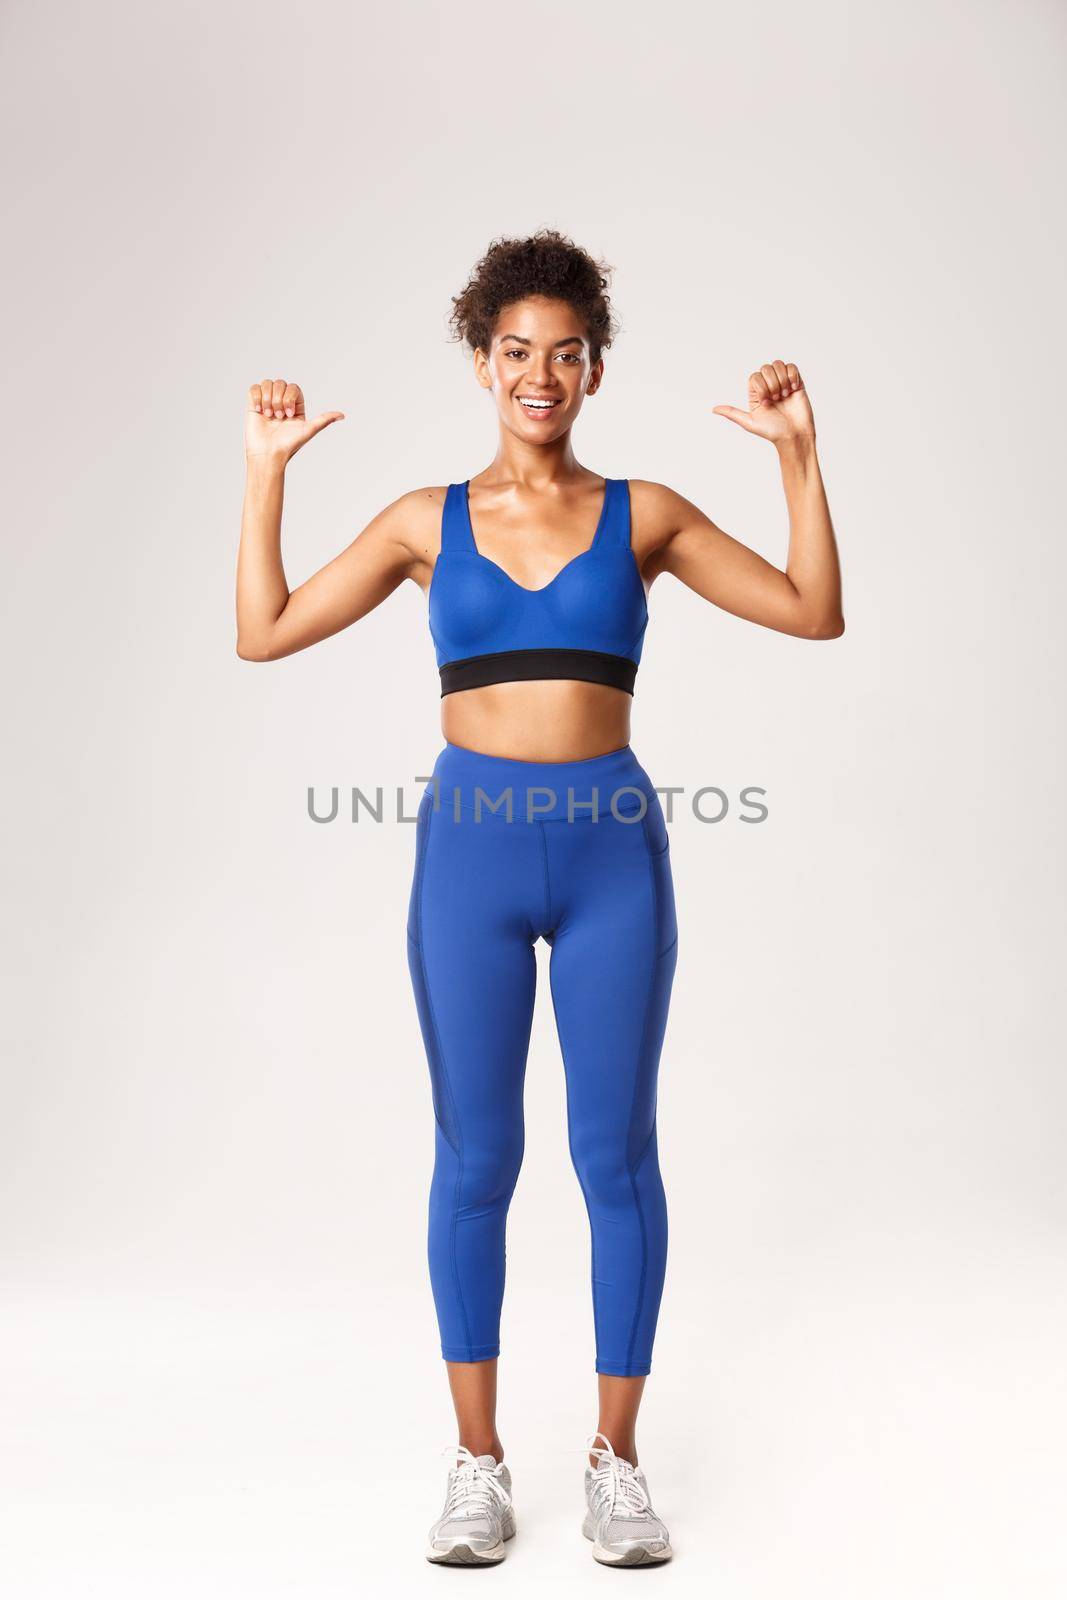 Full length of happy confident african-american sportswoman in blue sport outfit, pointing at herself with proud cheerful smile, showing workout progress, standing over white background.